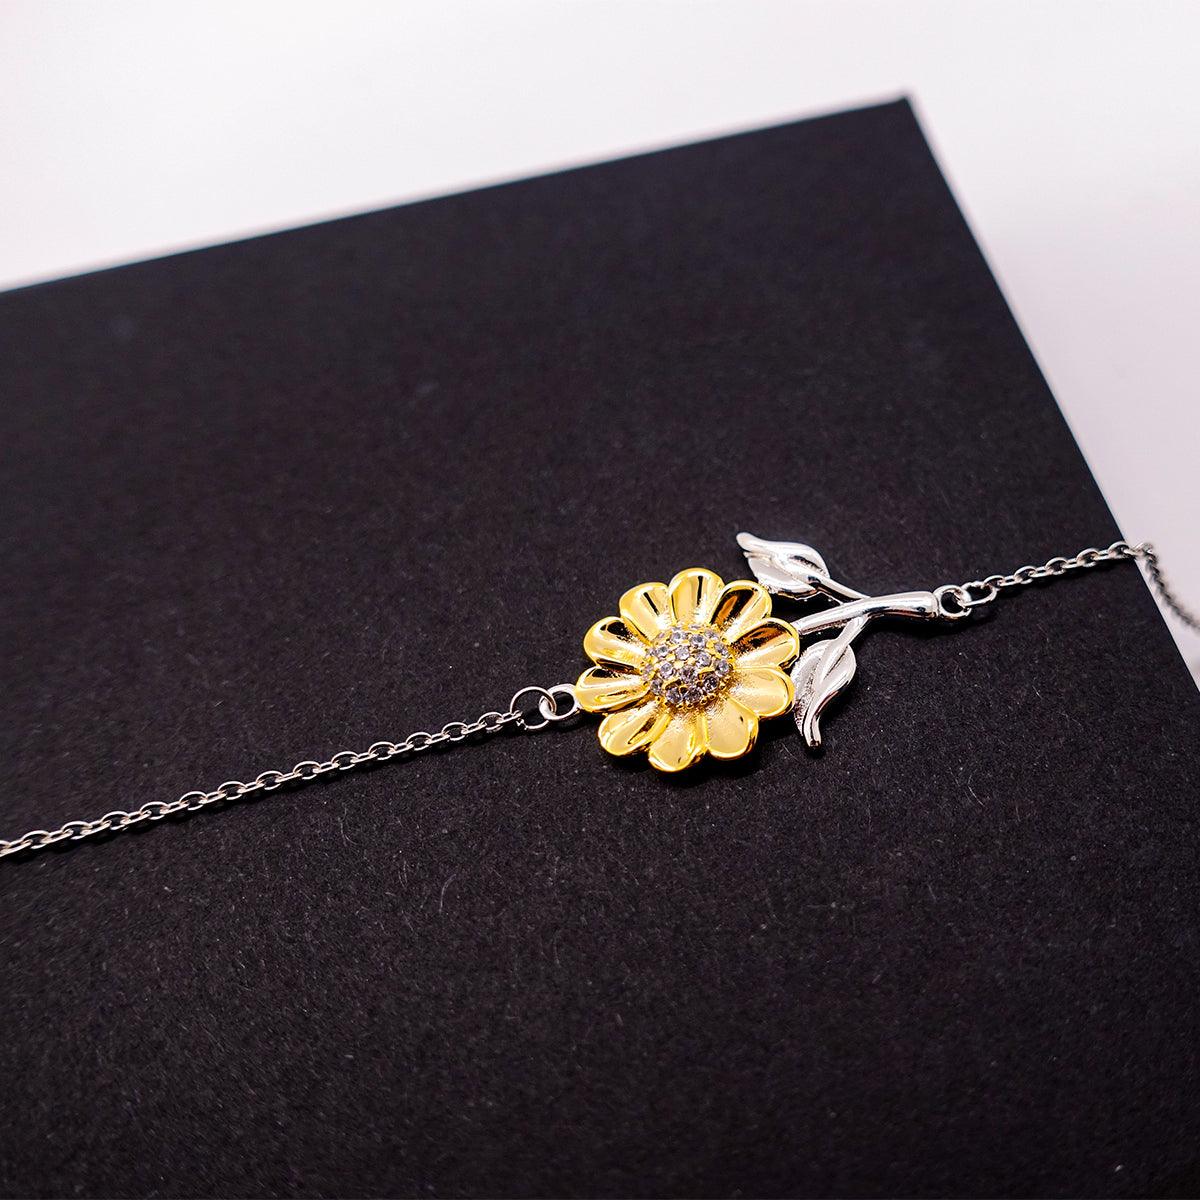 Alabama is my home Gifts, Lovely Alabama Birthday Christmas Sunflower Bracelet For People from Alabama, Men, Women, Friends - Mallard Moon Gift Shop